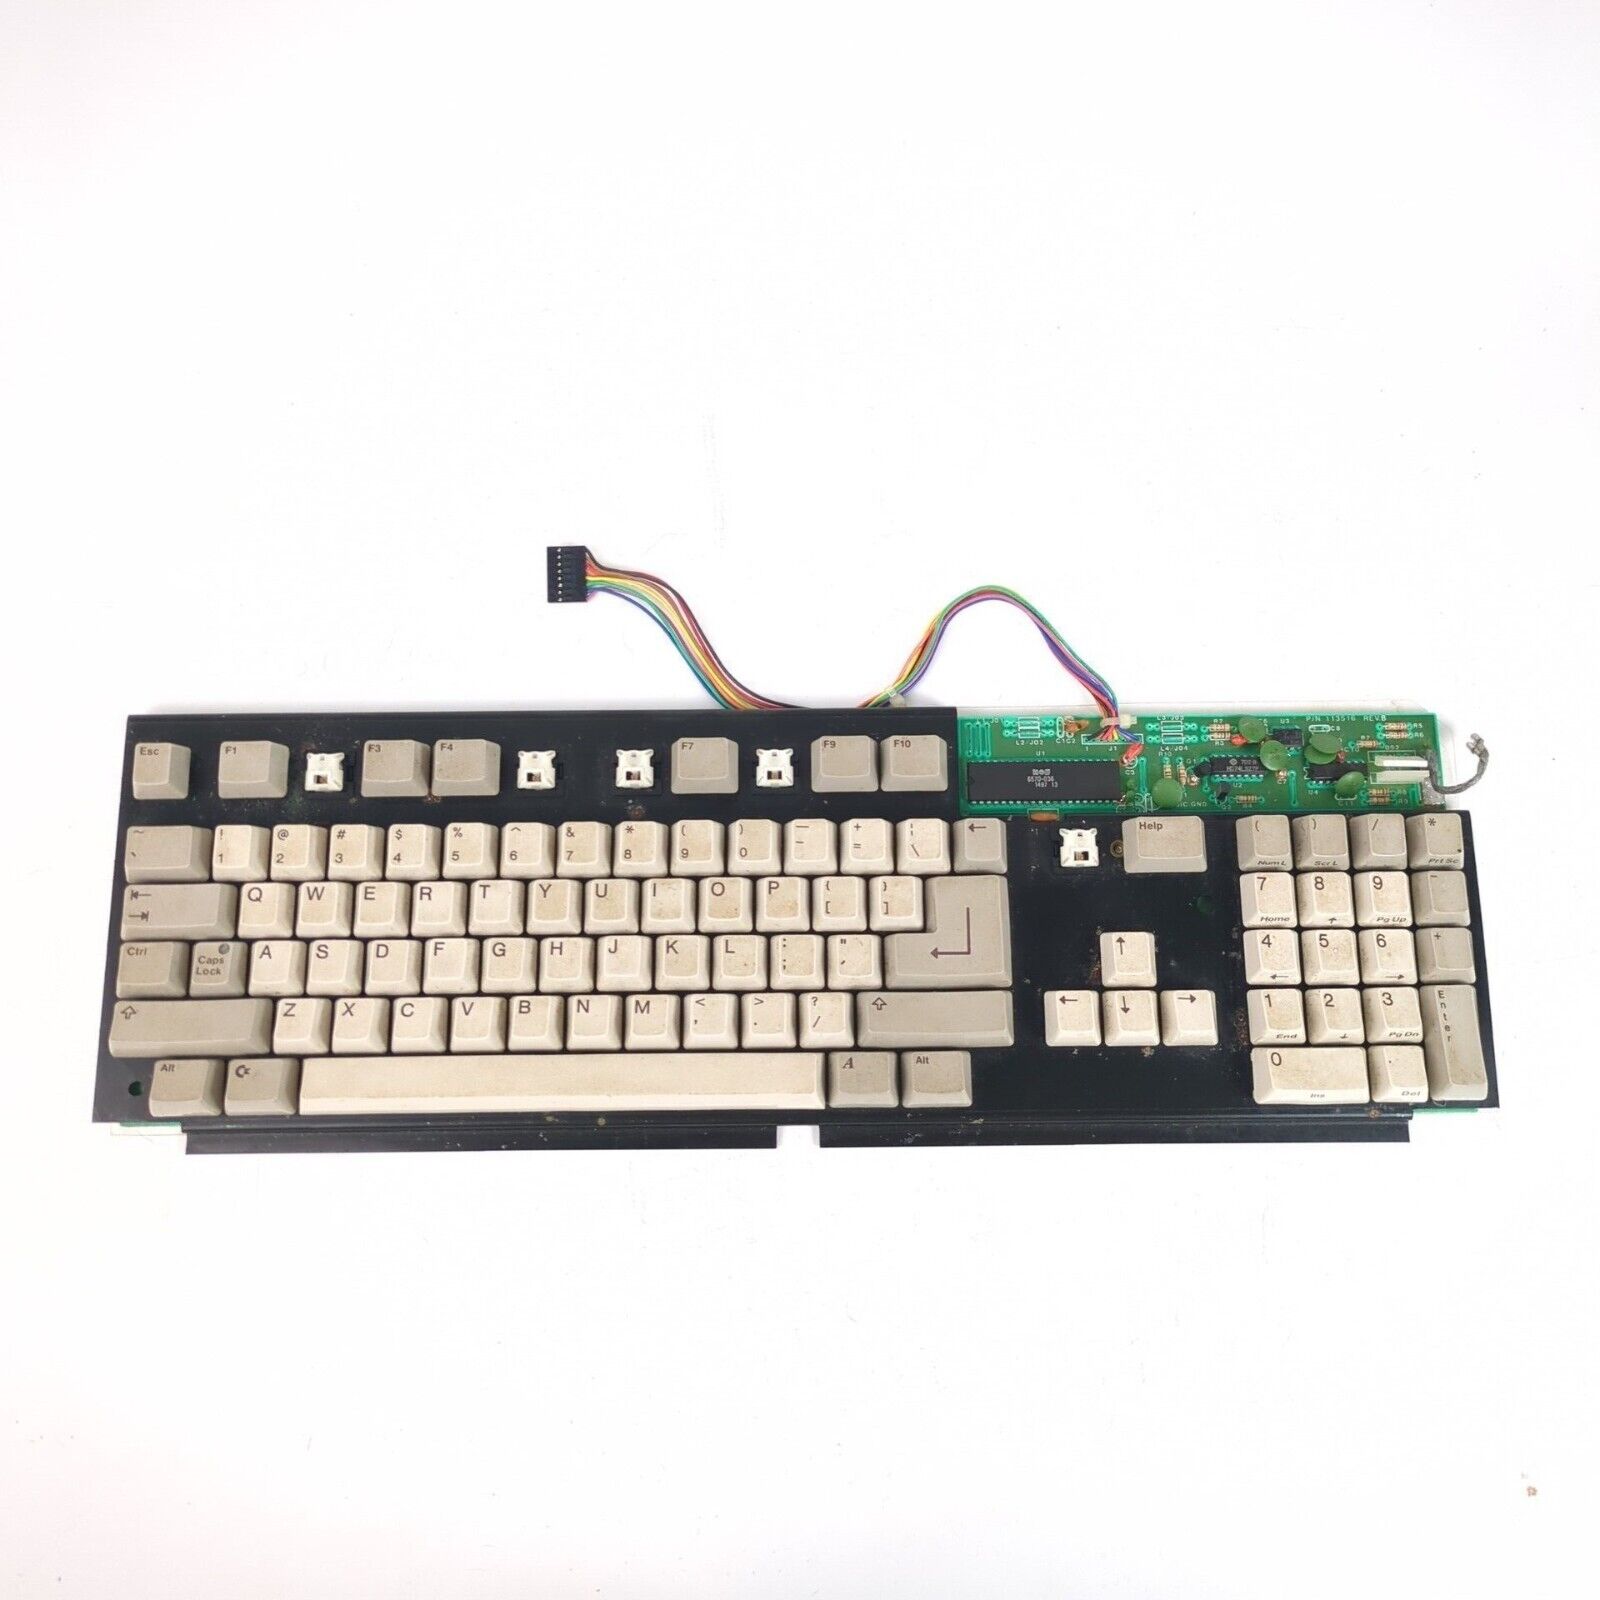 Commodore Amiga Keyboard For Parts Repair Untested & Incomplete